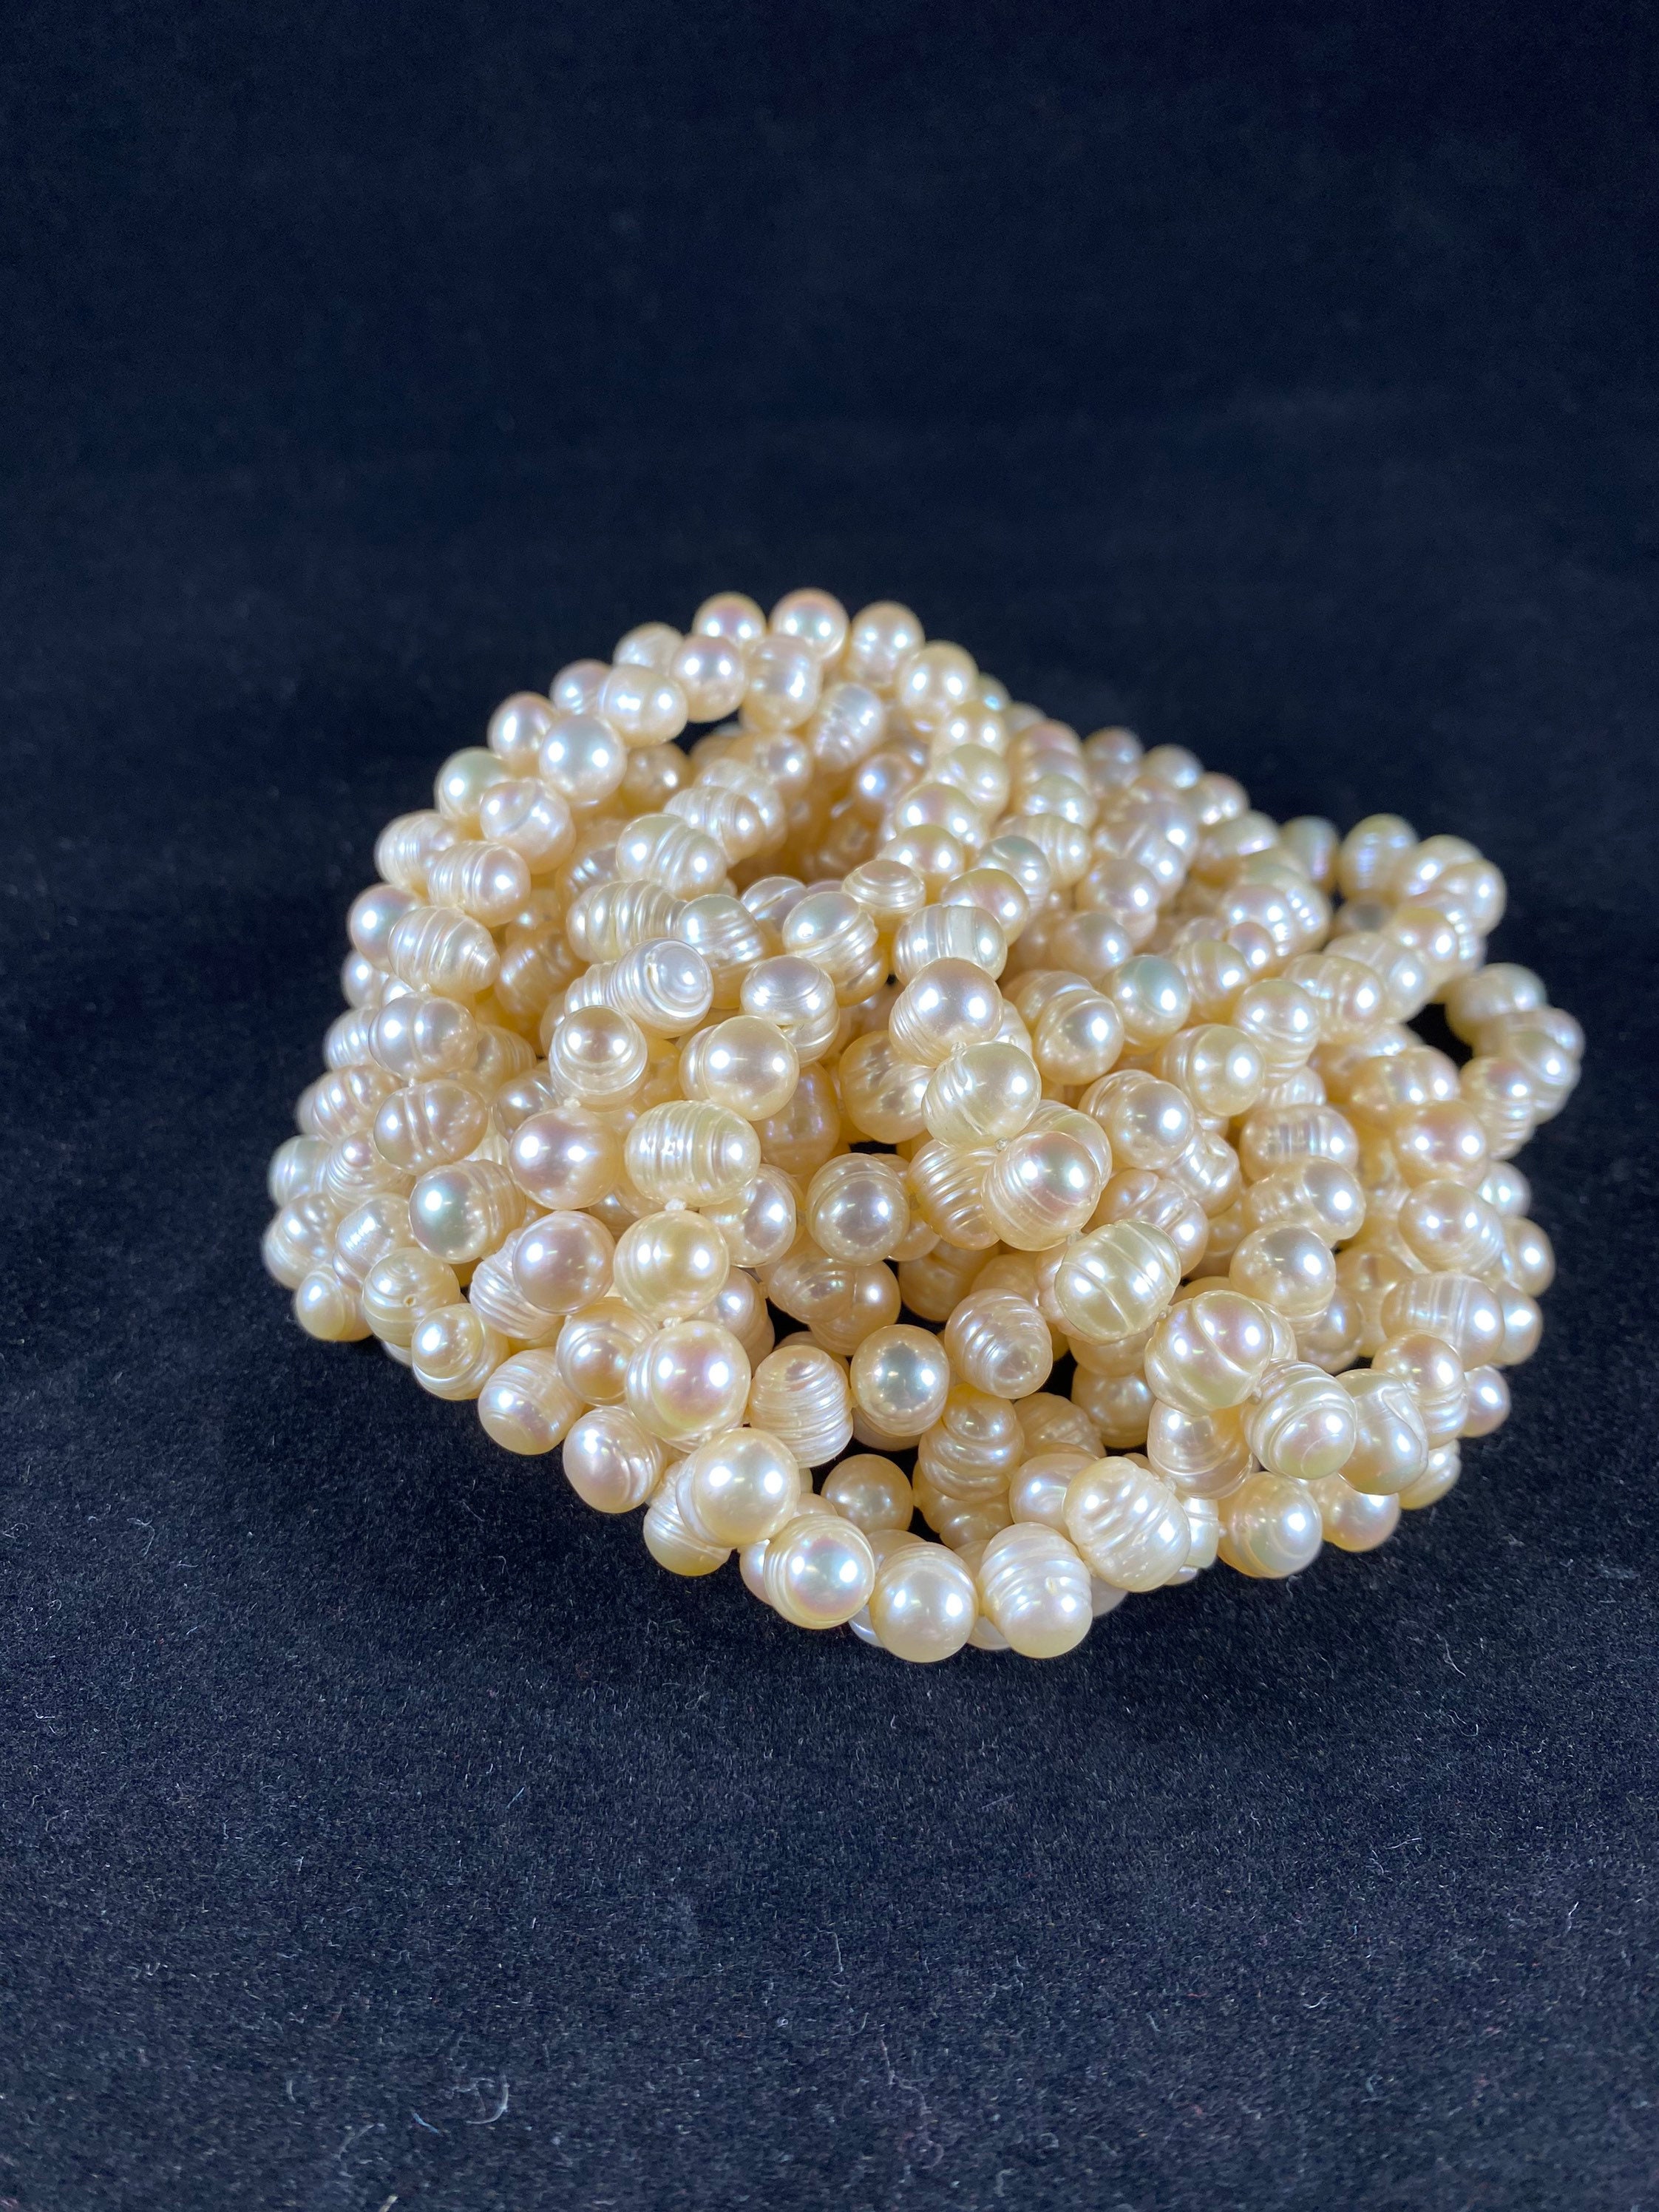 3MM Ivory/Cream Colored Potato Shaped Natural Freshwater Pearls P-31 –  Ayla's Originals